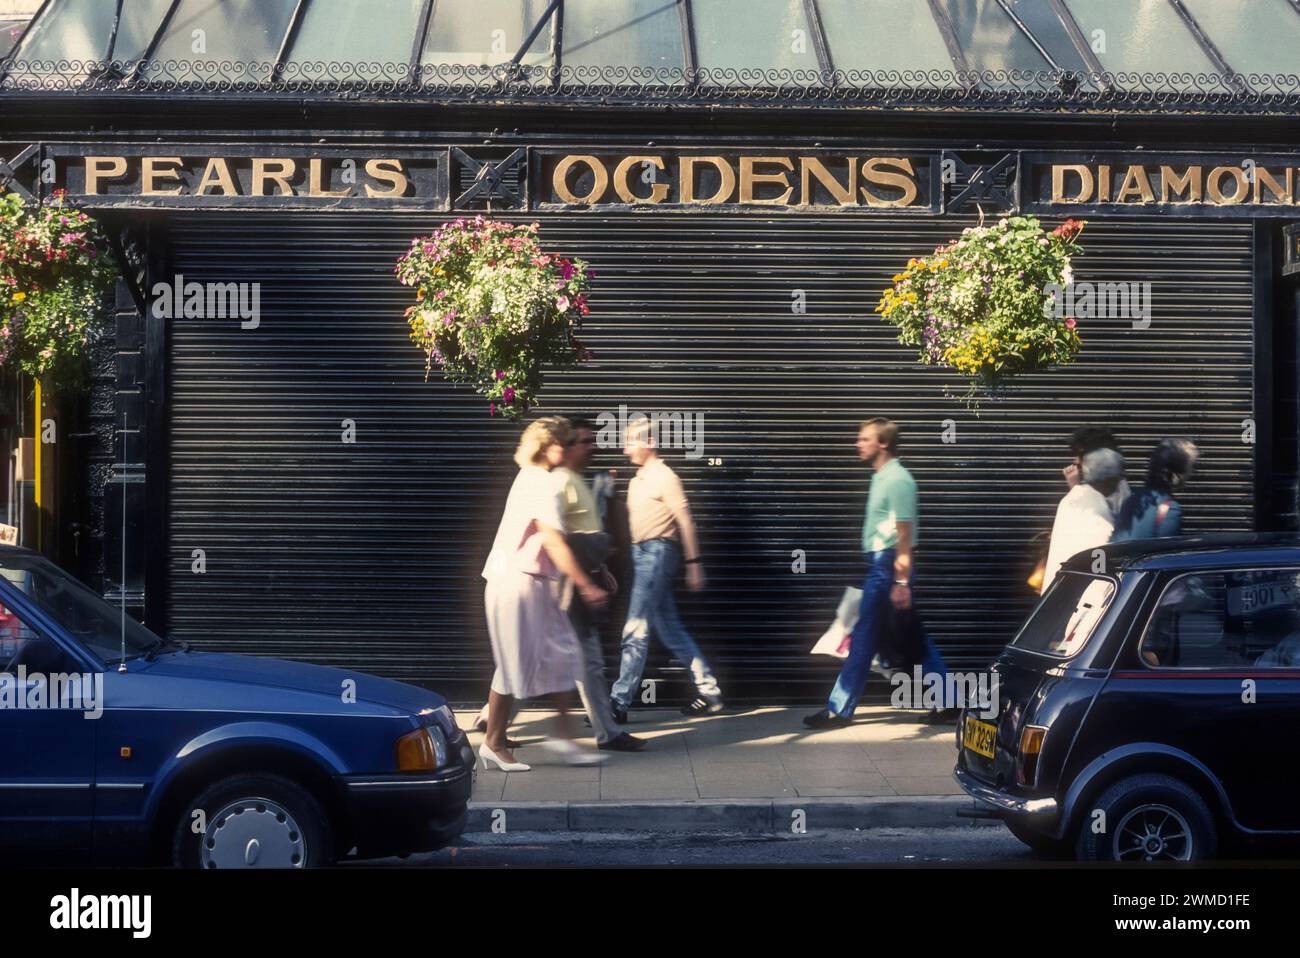 1987 archive photograph of Ogdens jeweller's shop in Harrogate. Stock Photo